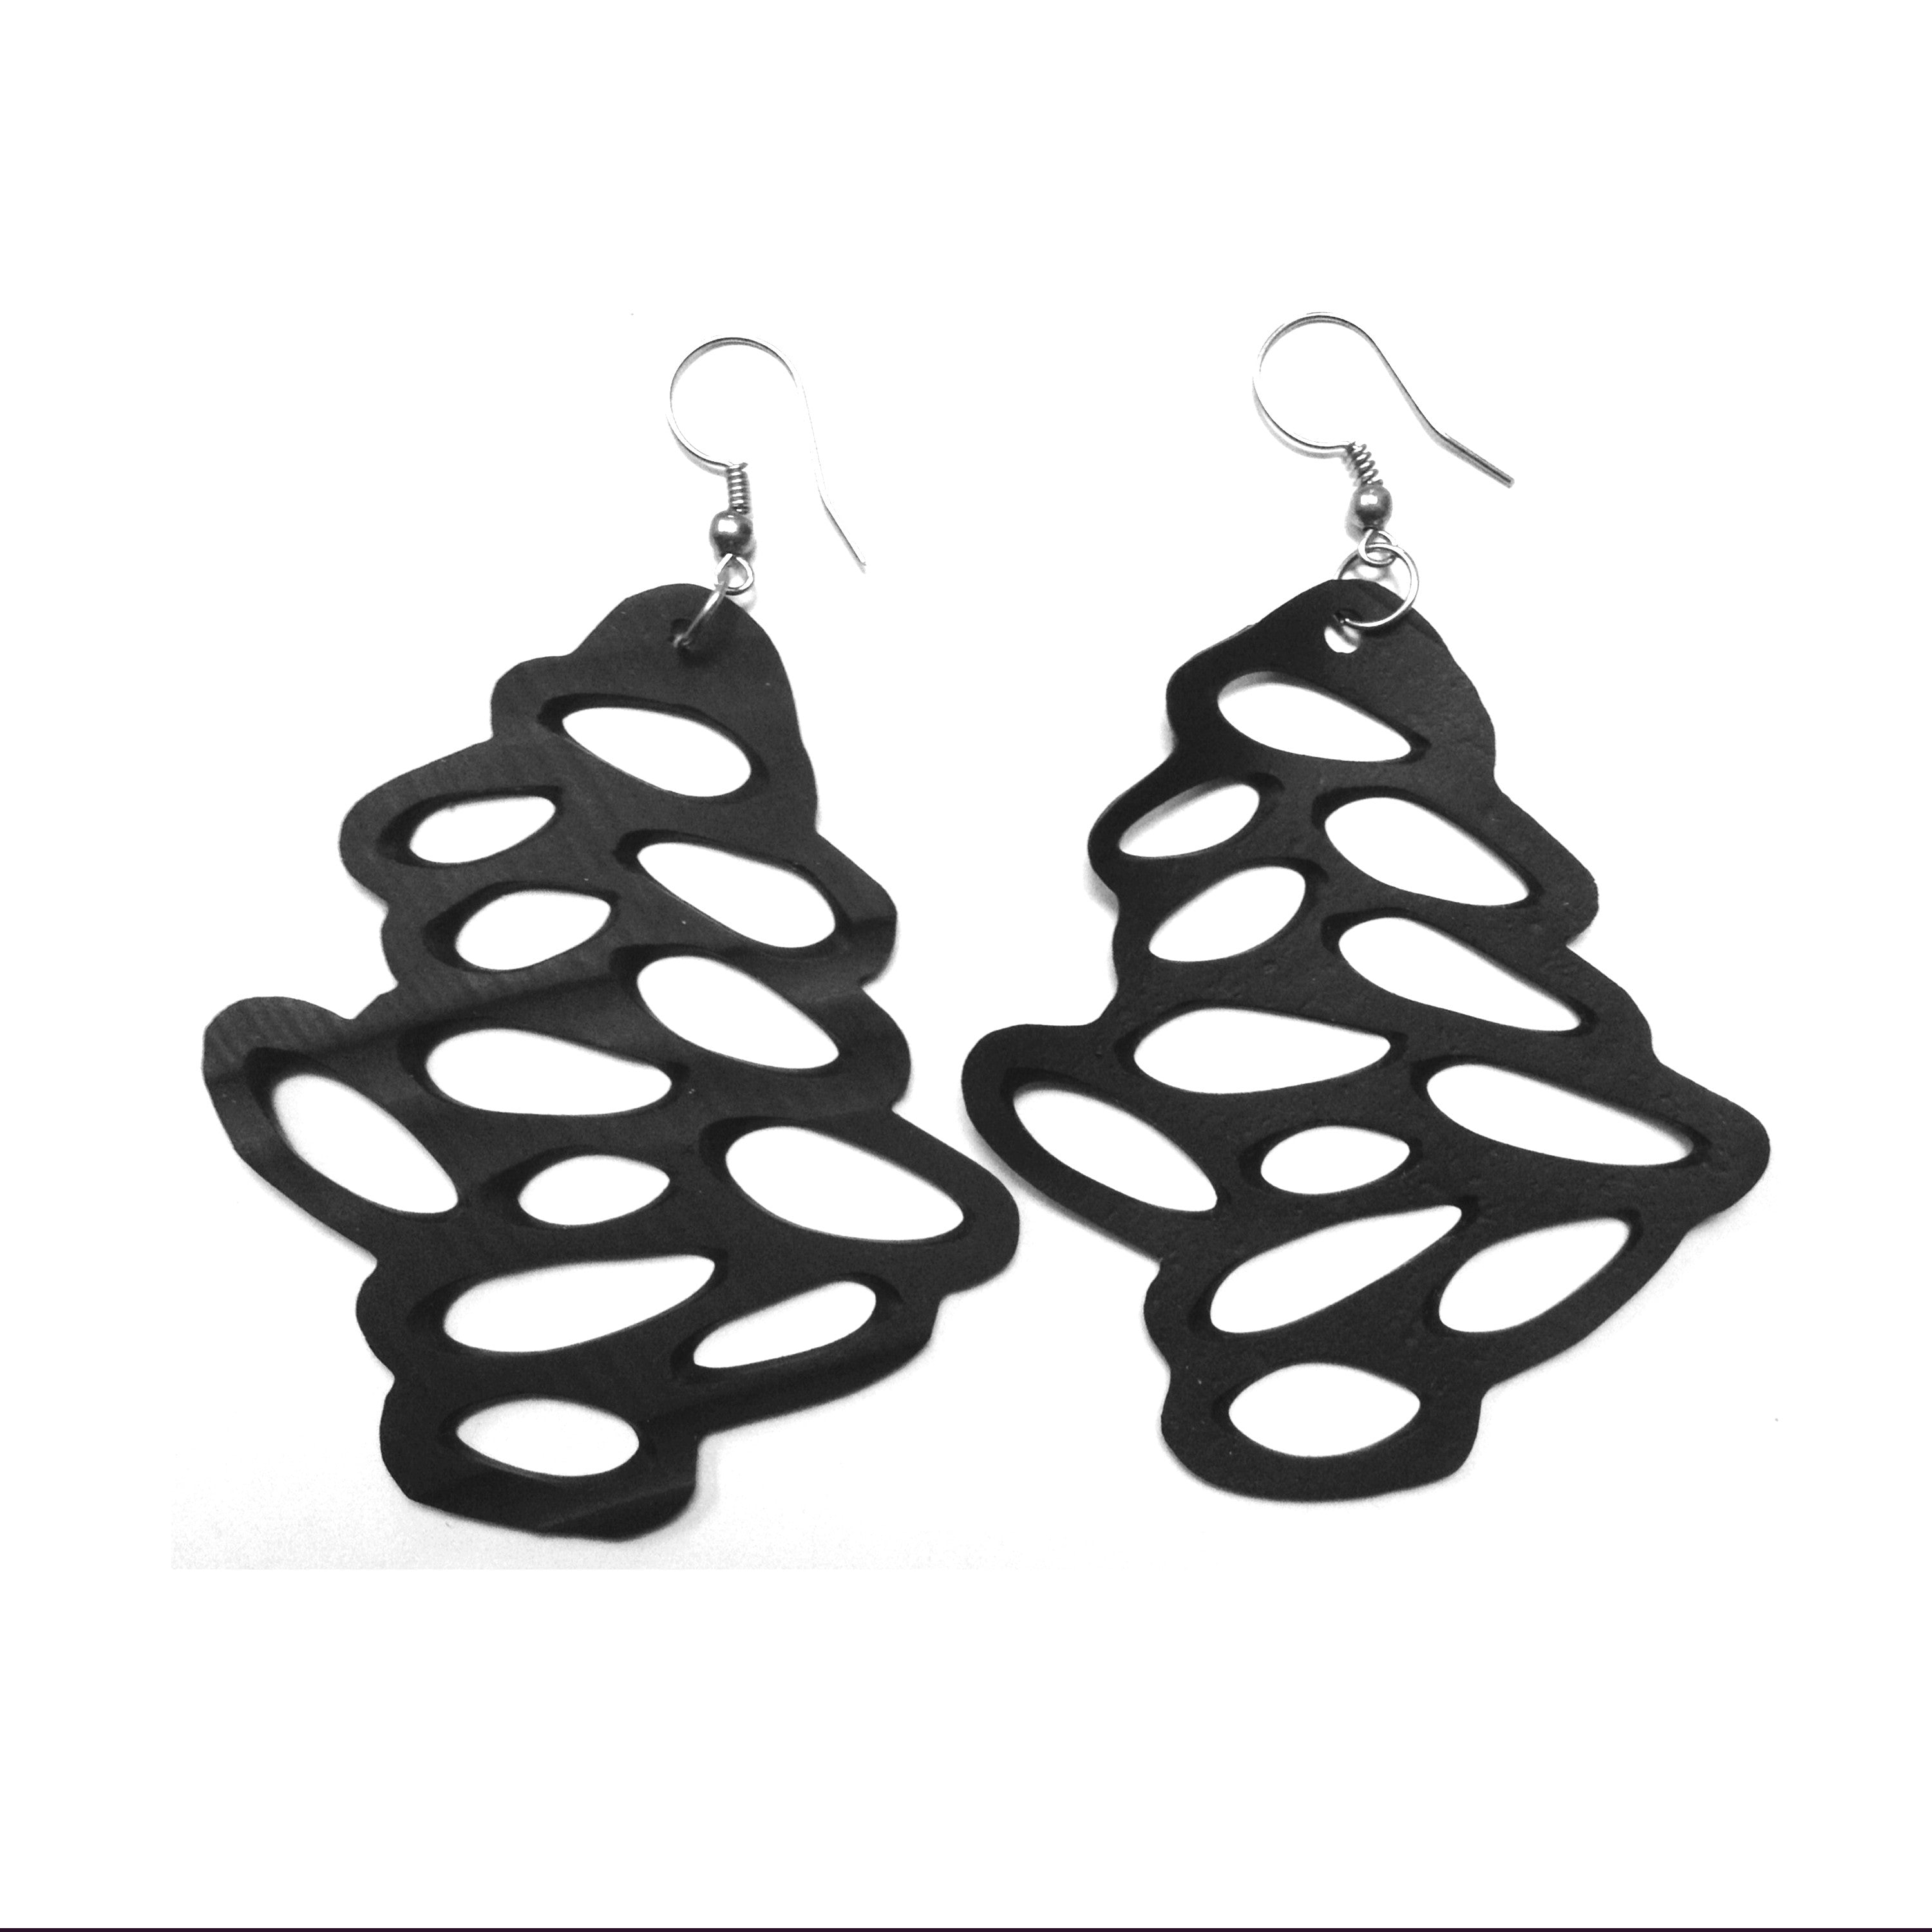 Pebble Recycled Rubber Earrings by Paguro Upcycle